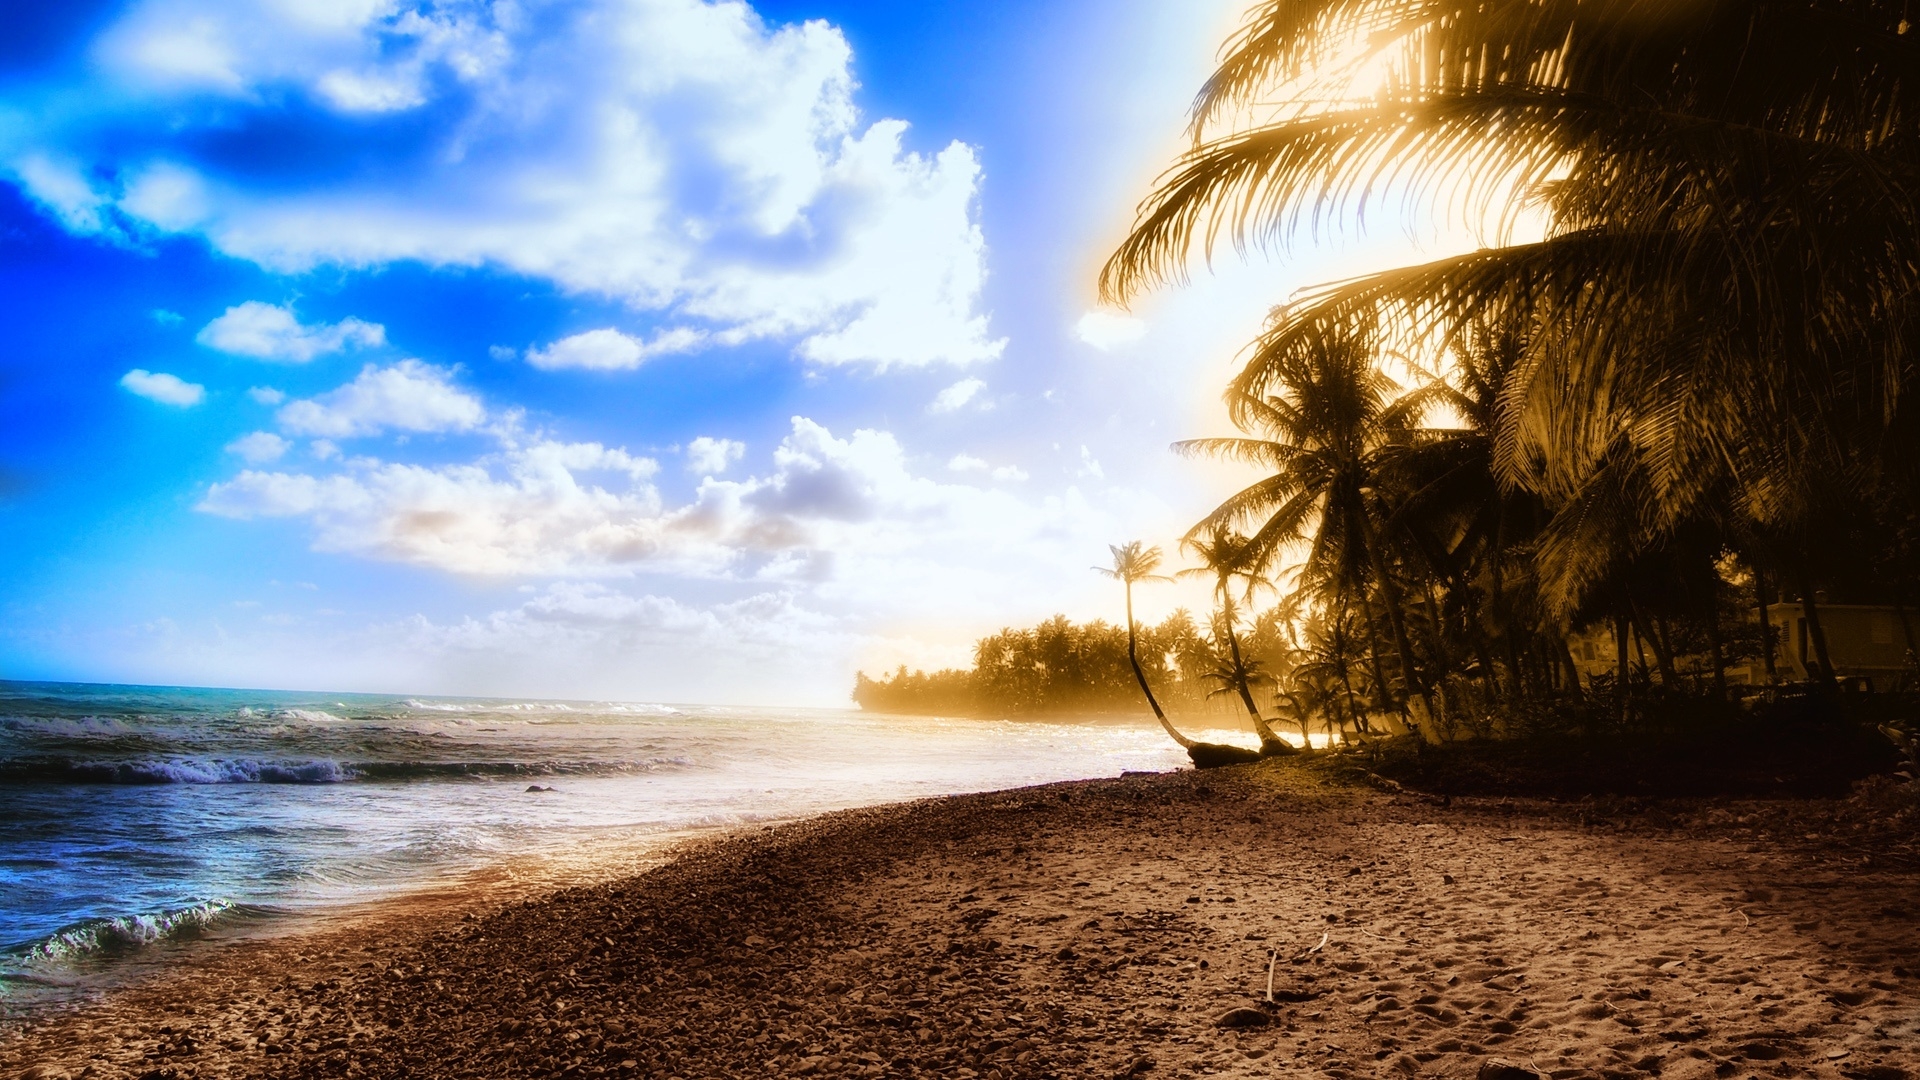 Exotic beach for 1920 x 1080 HDTV 1080p resolution